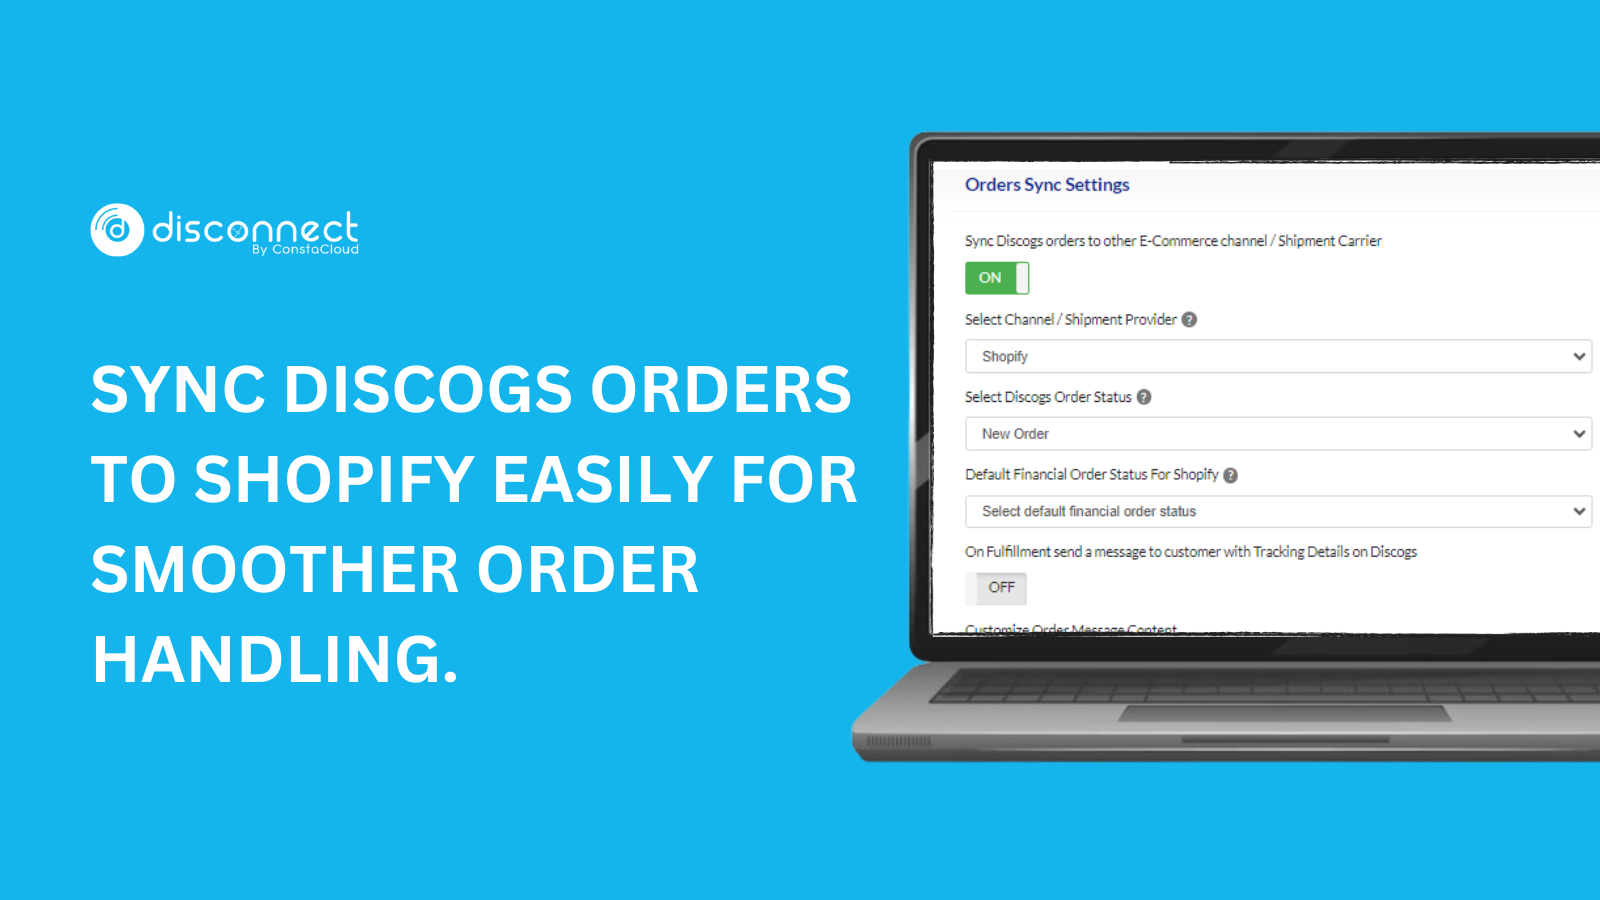 Sync Discogs orders to Shopify